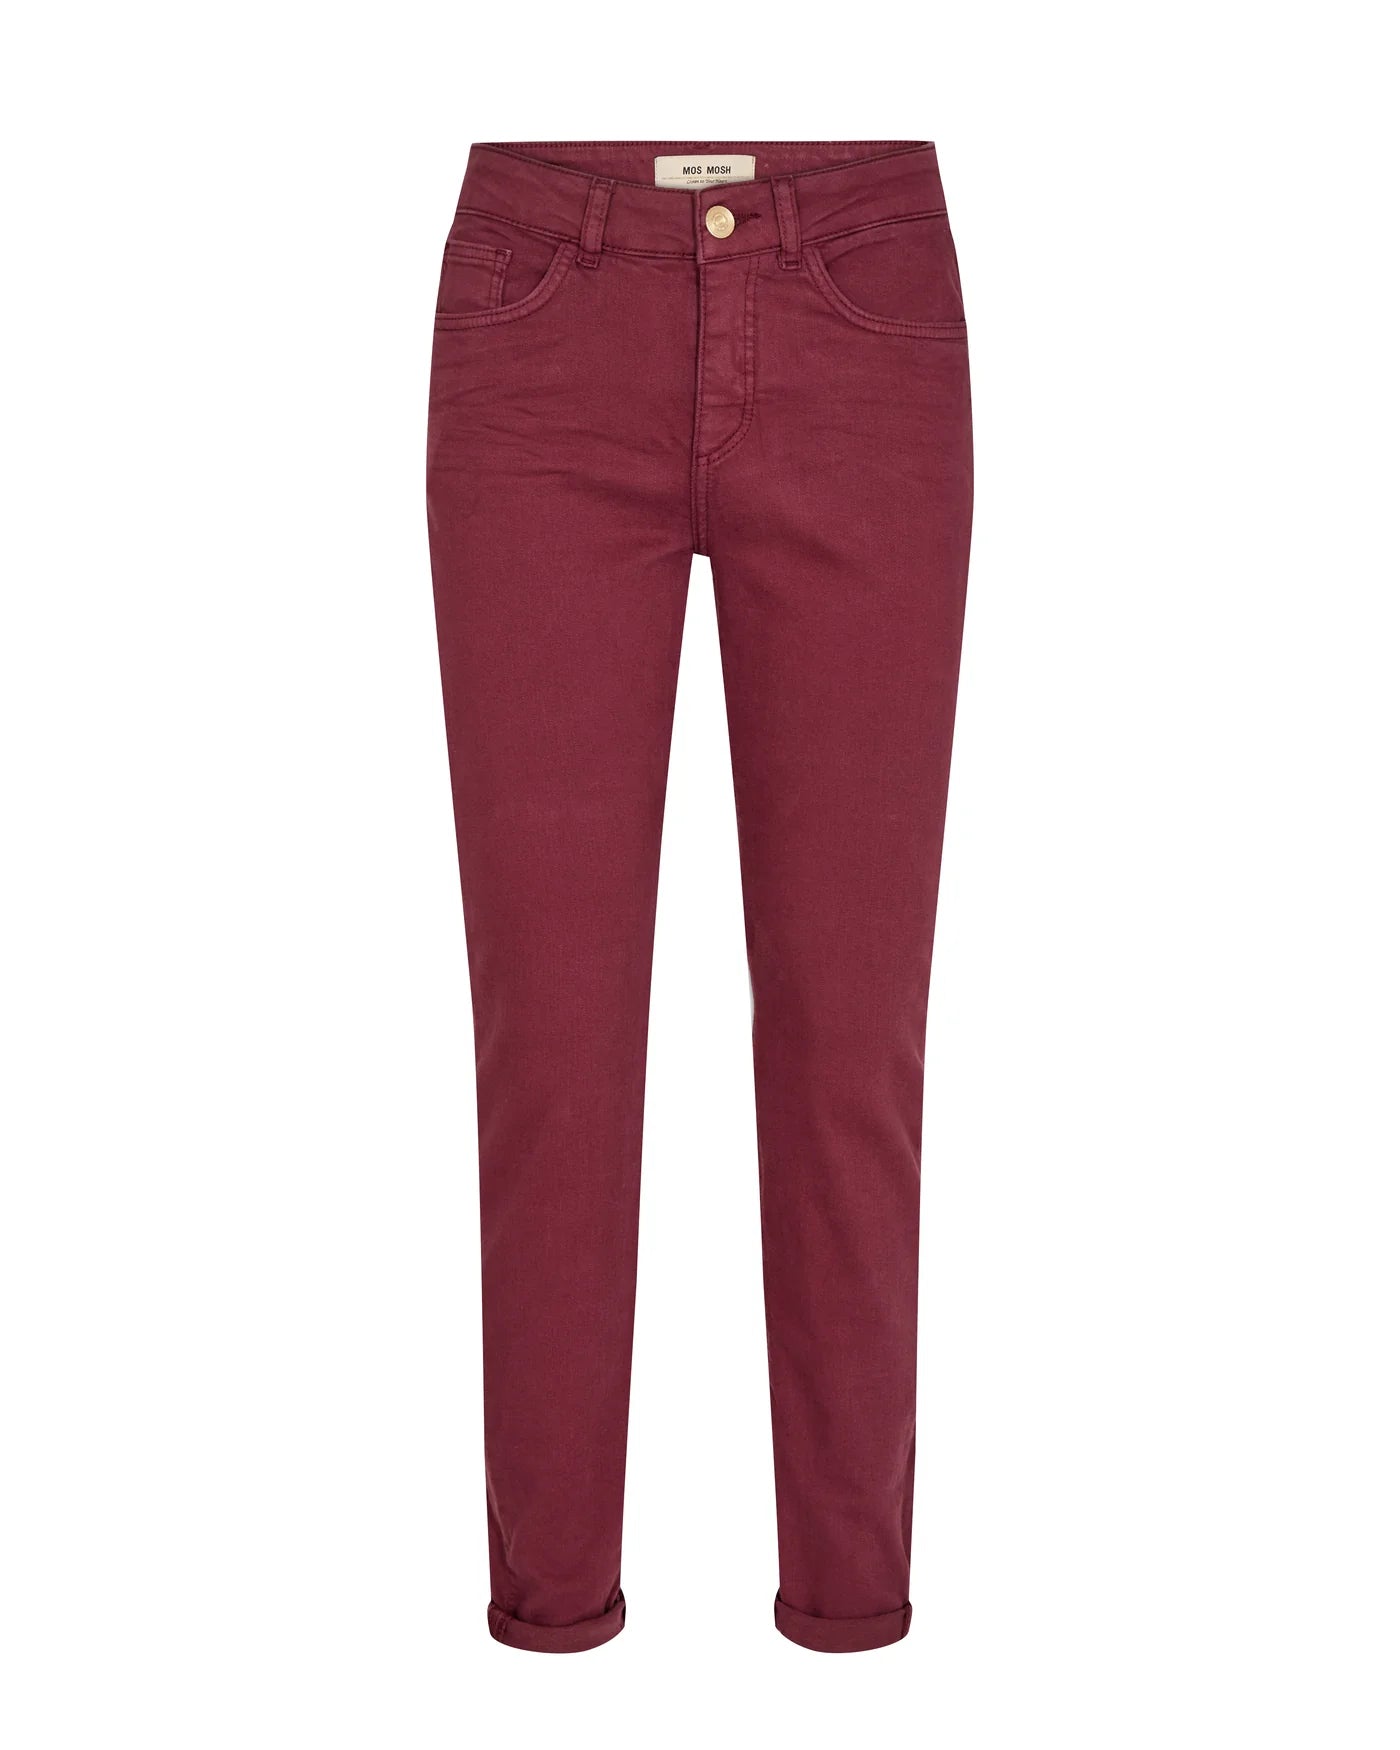 Mos Mosh Vice Colour Diu Pant - Oxblood Red